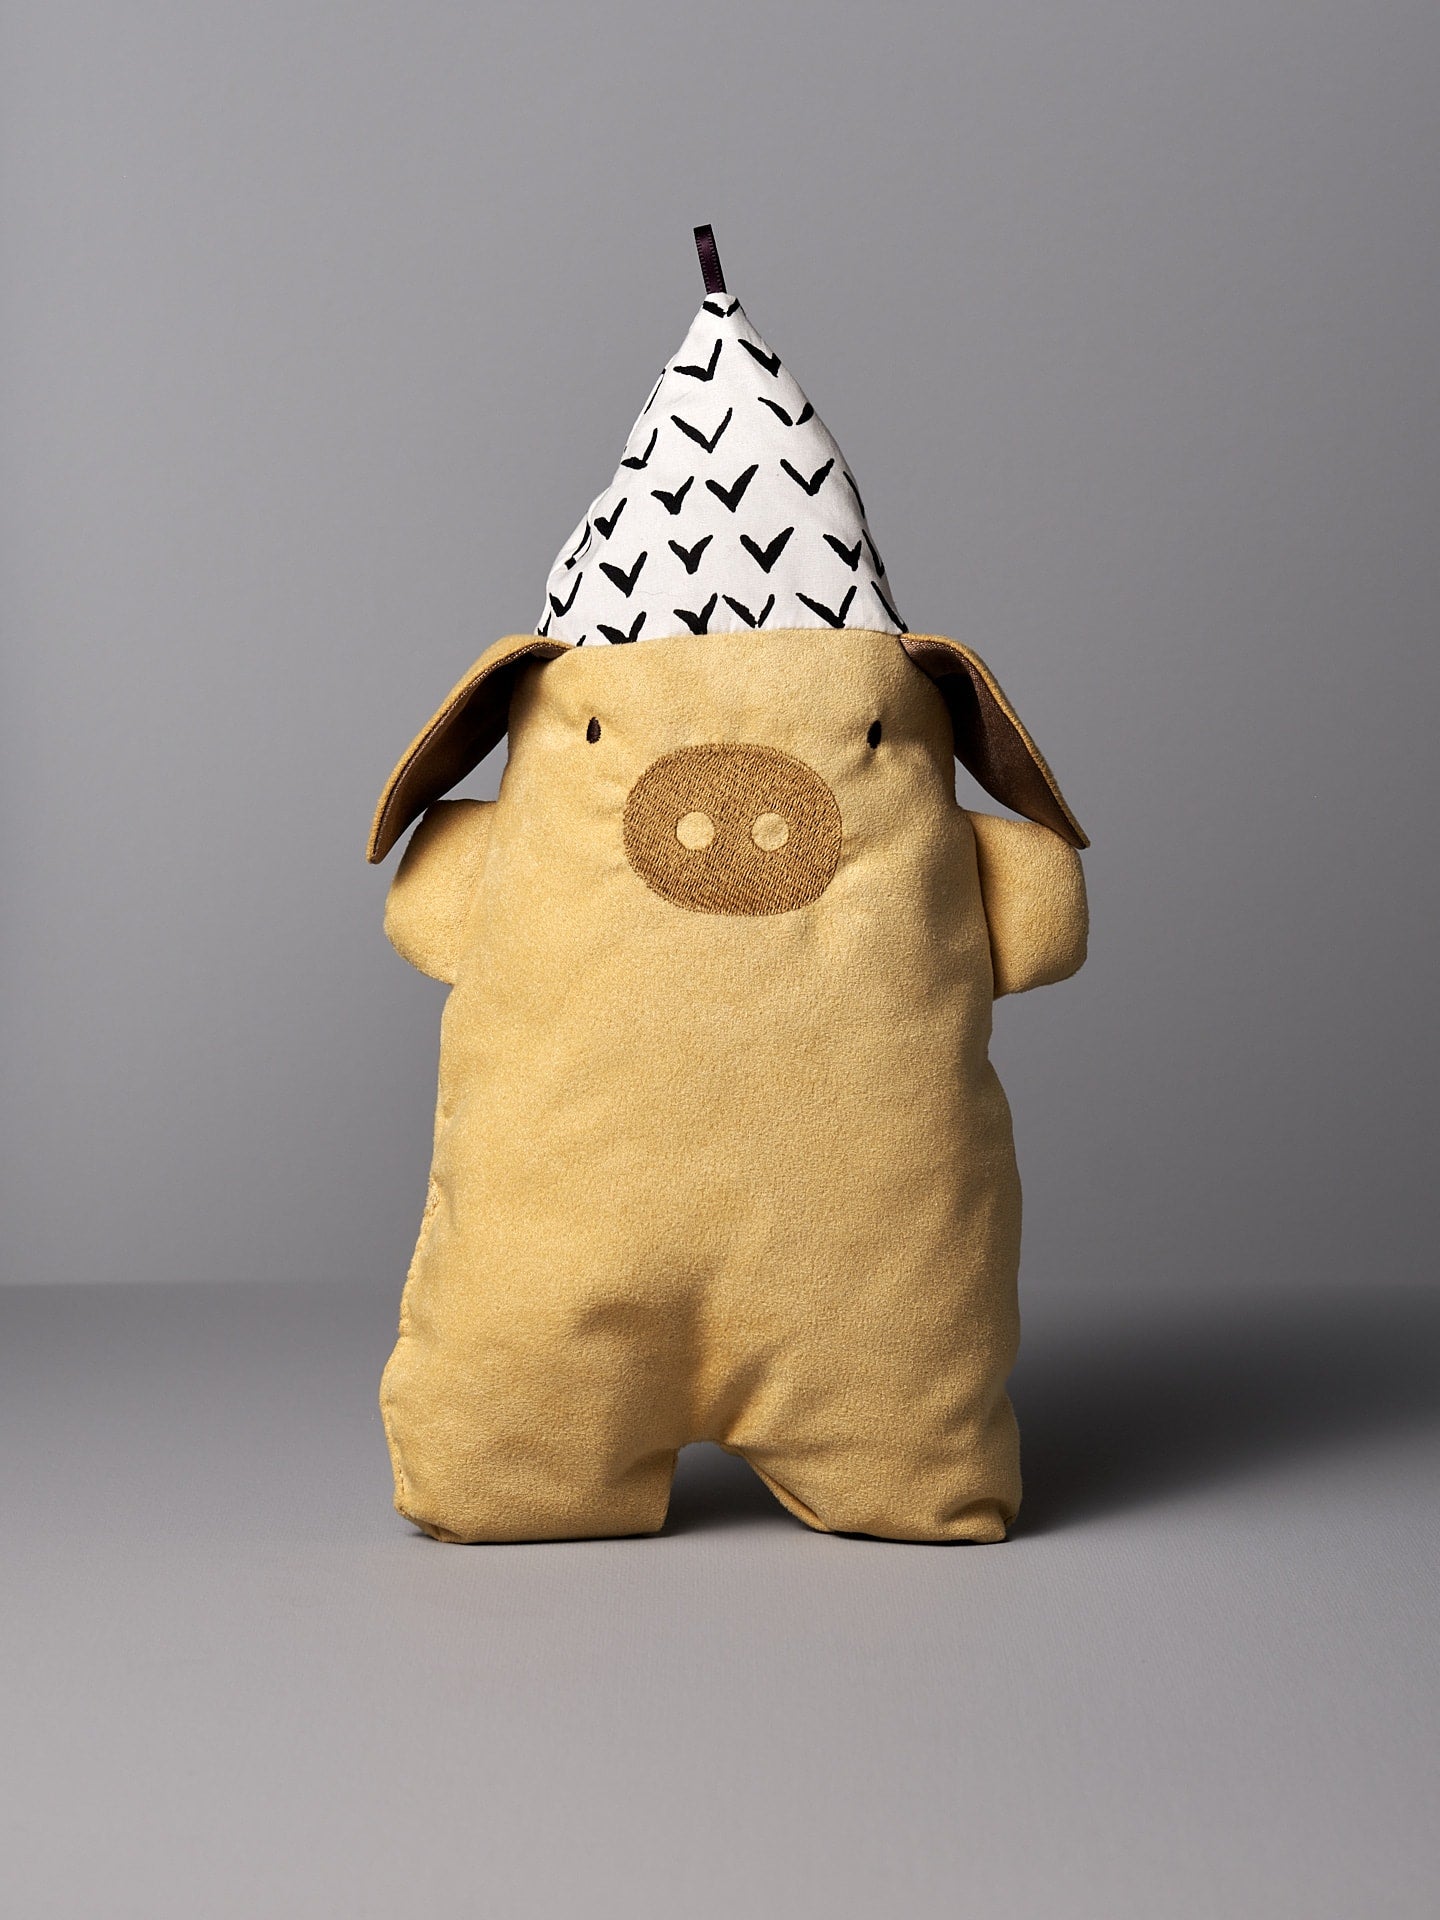 A Yali le Cochon stuffed pig wearing a party hat from Raplapla.